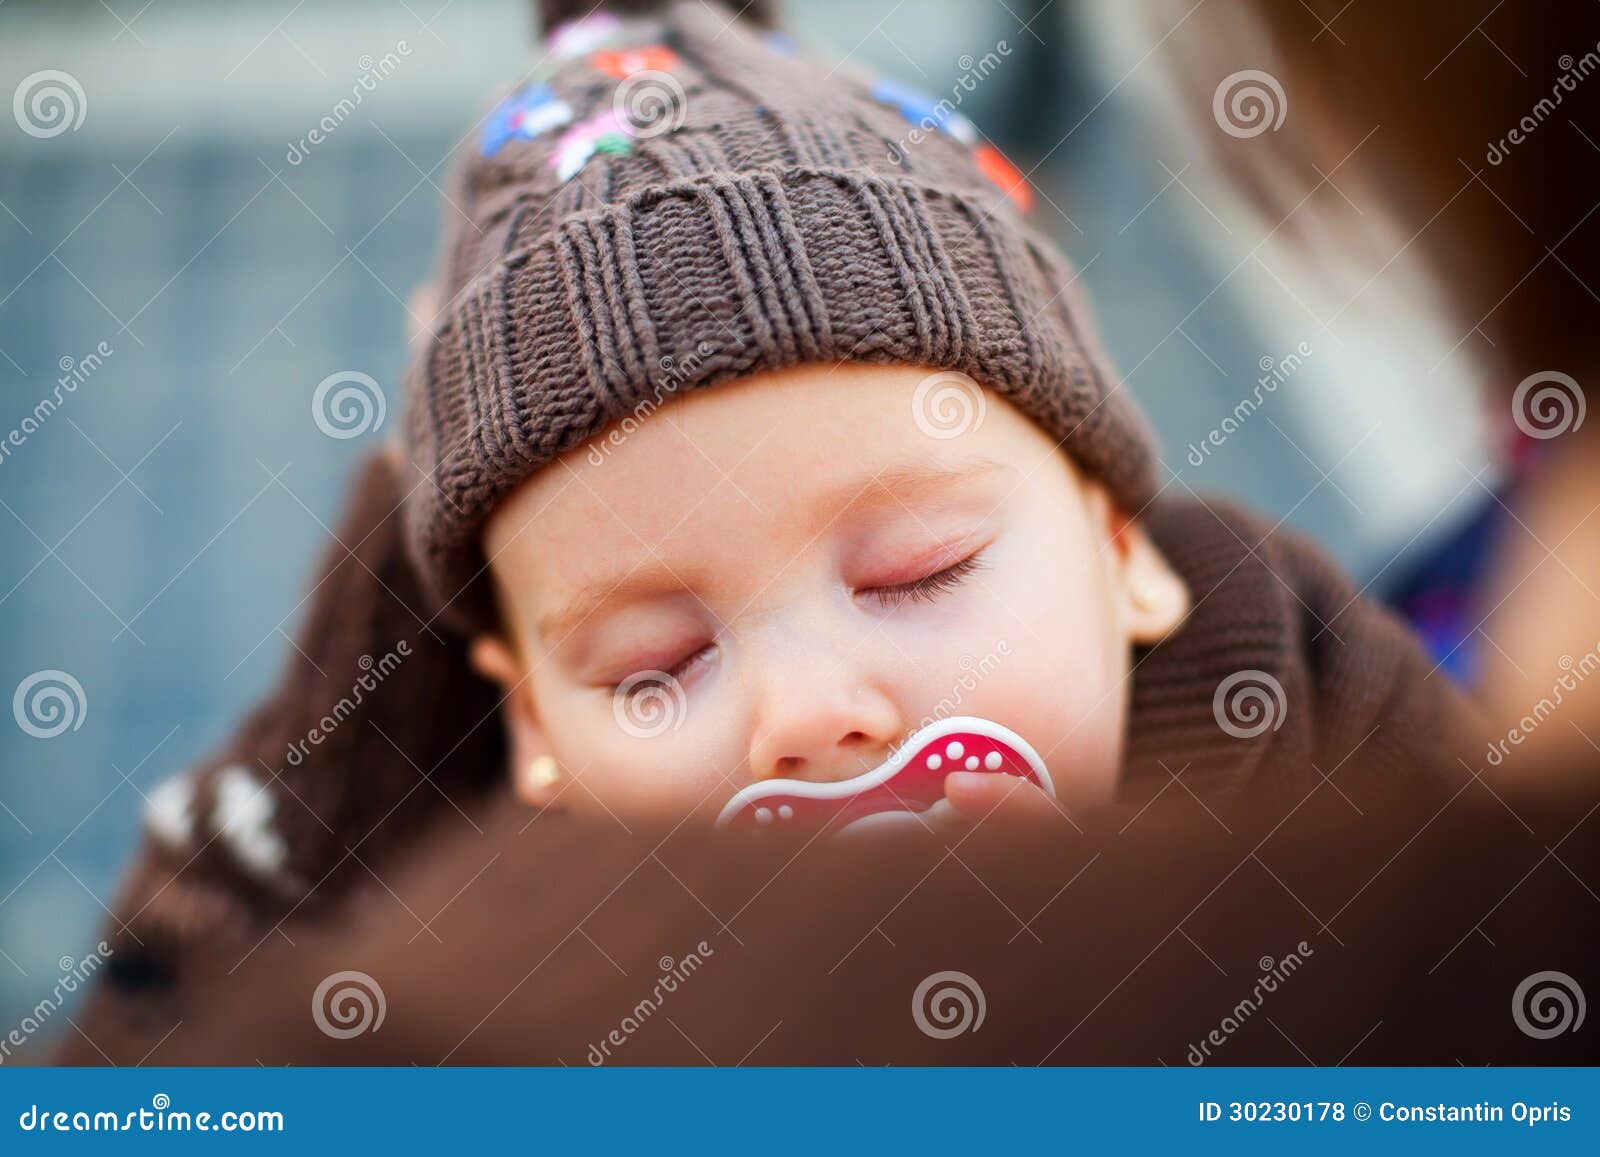 Sleeping in mother s arms stock photo. Image of childhood - 30230178